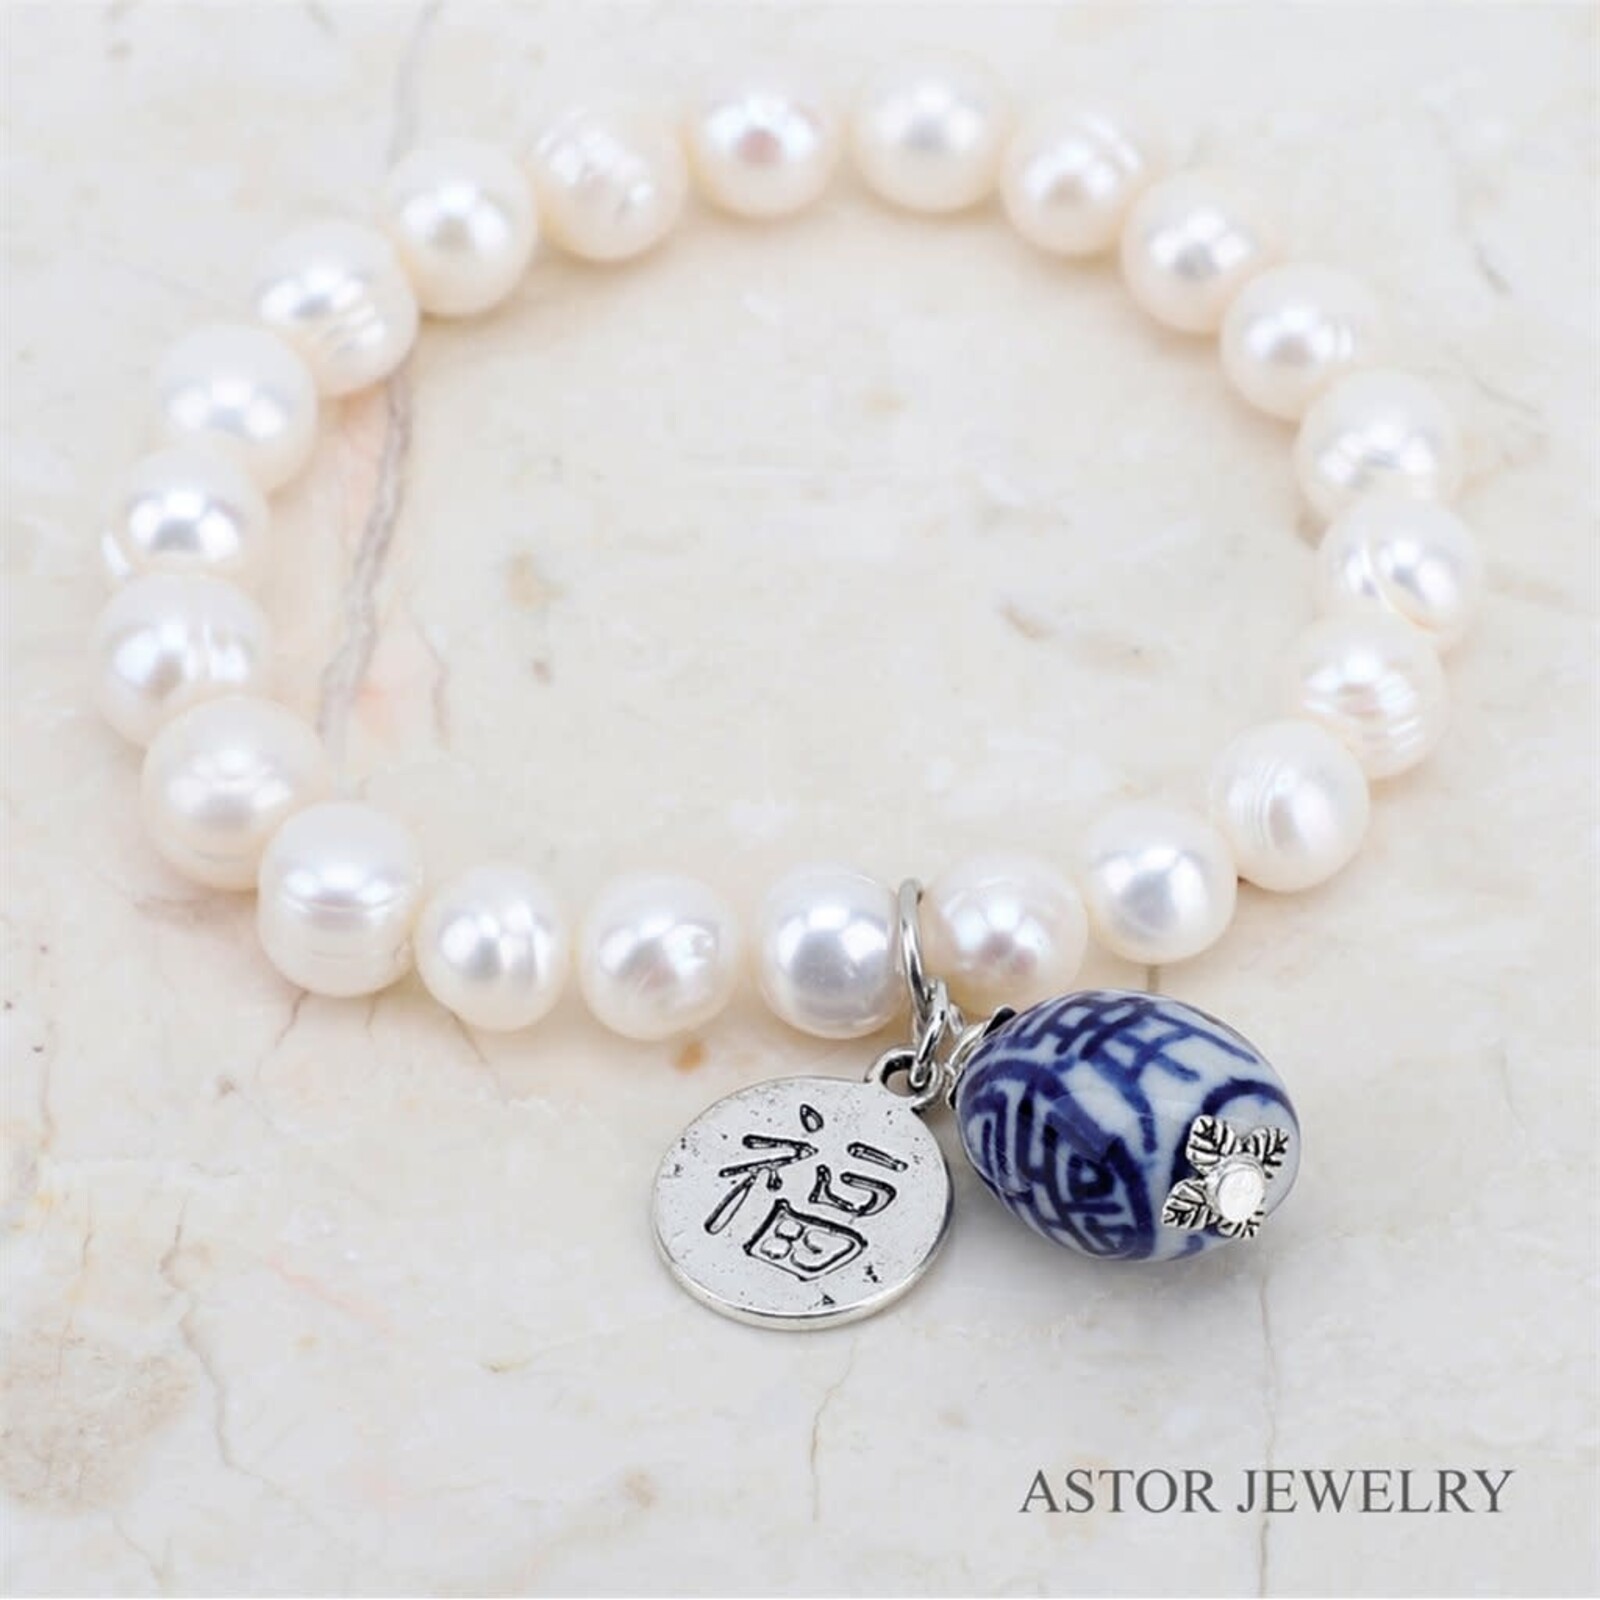 Astor Jewelry Fresh Water Pearl  Bracelet  Blue & White Bead    Made in USA 24261 loading=